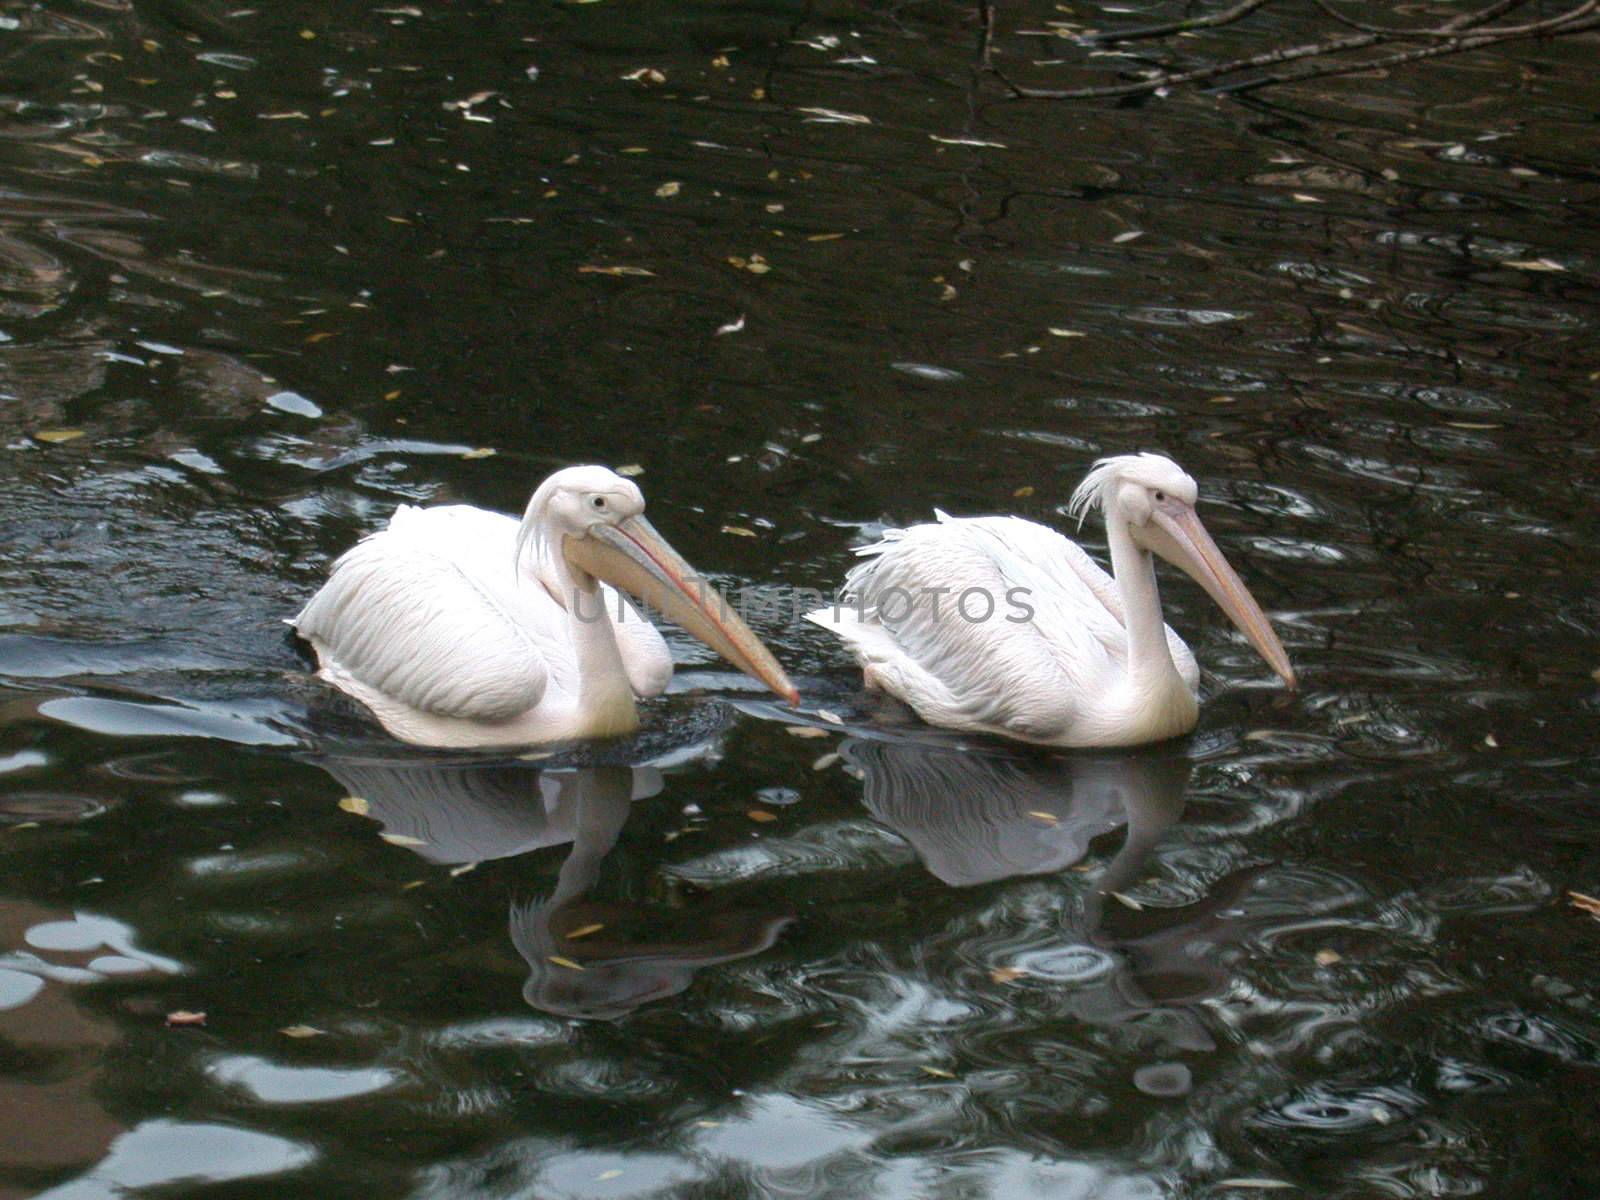 The pelicans in lake